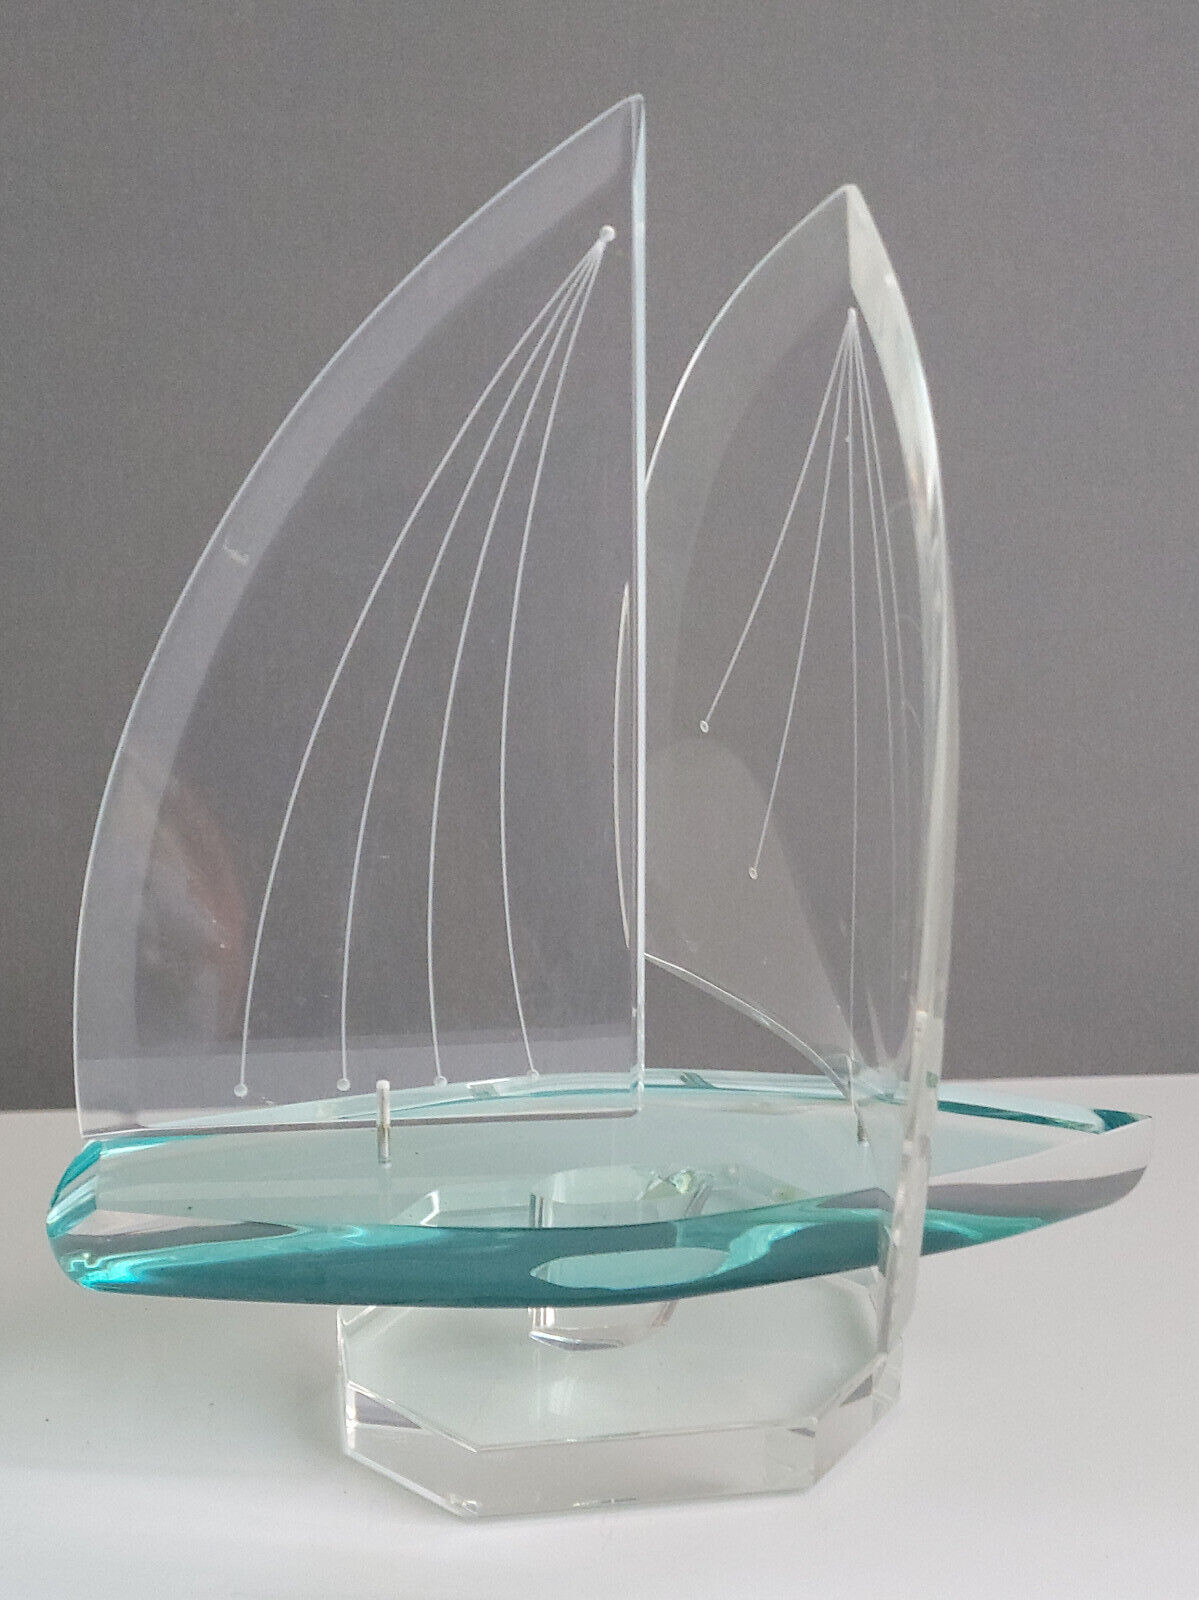 Men's Gifts Signed J.Penri Lucite Acrylic Sailboat Sculpture 2001 Collection